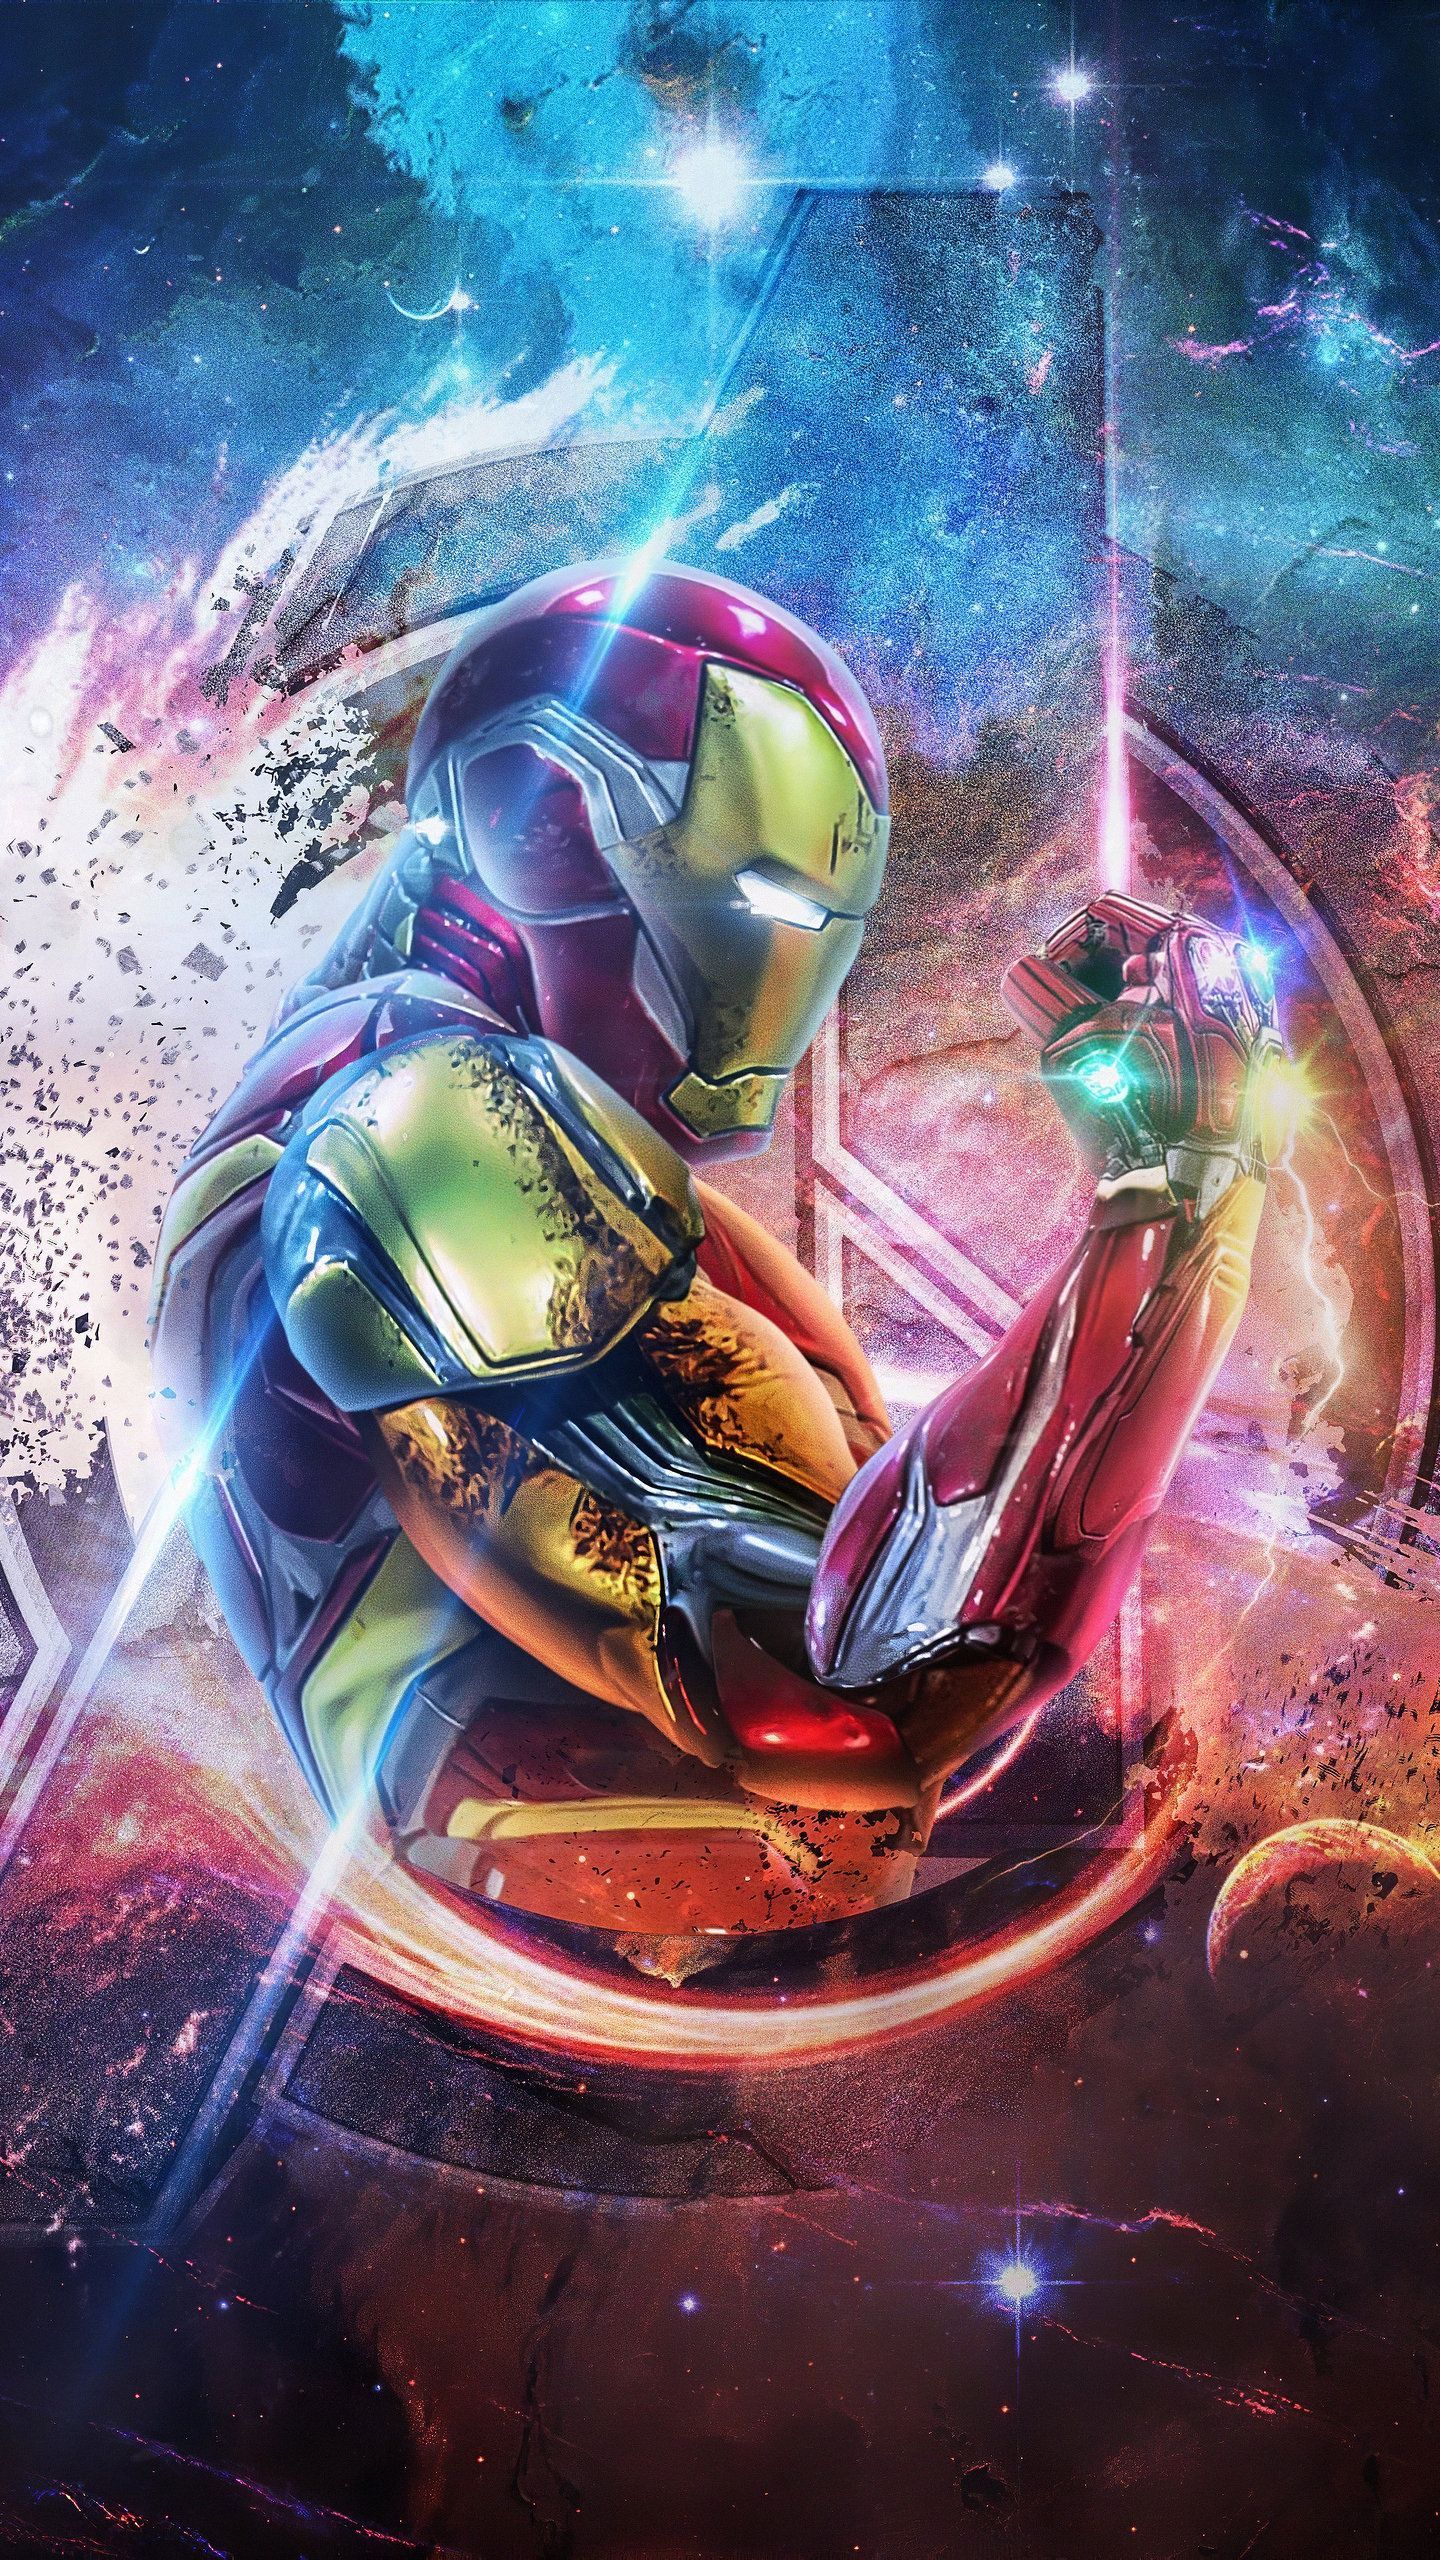 Cool Iron Man Marvel Comic 2020 Wallpapers - Wallpaper Cave